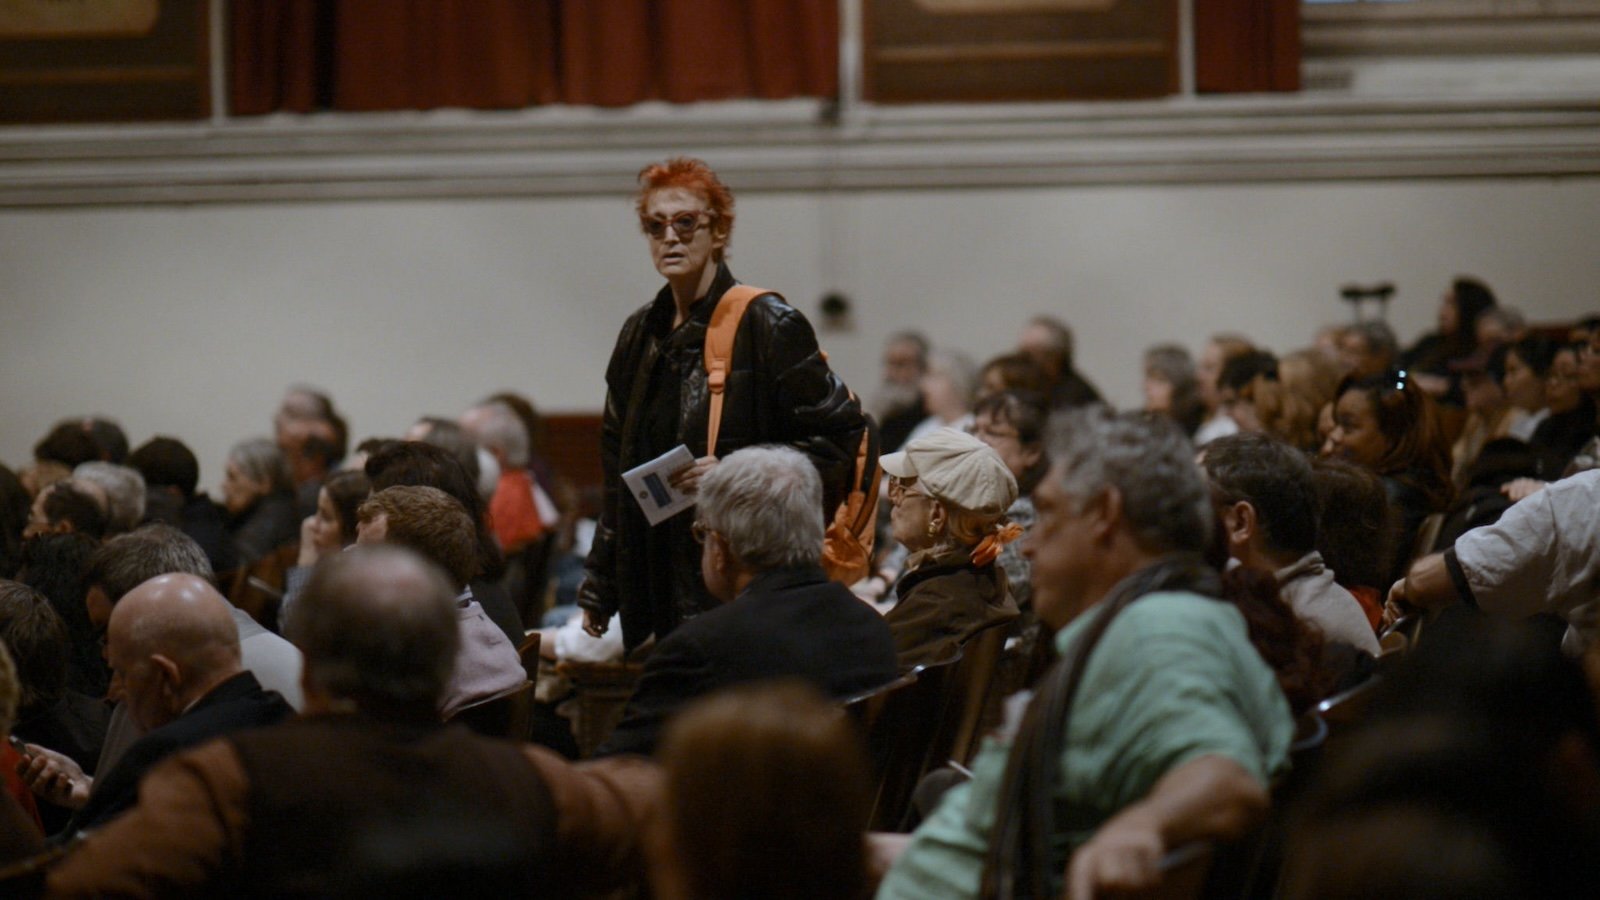 A middle aged woman with short spiky red hair stands amidst a group of people sitting in an auditorium...they all look forward, she looks to her left.